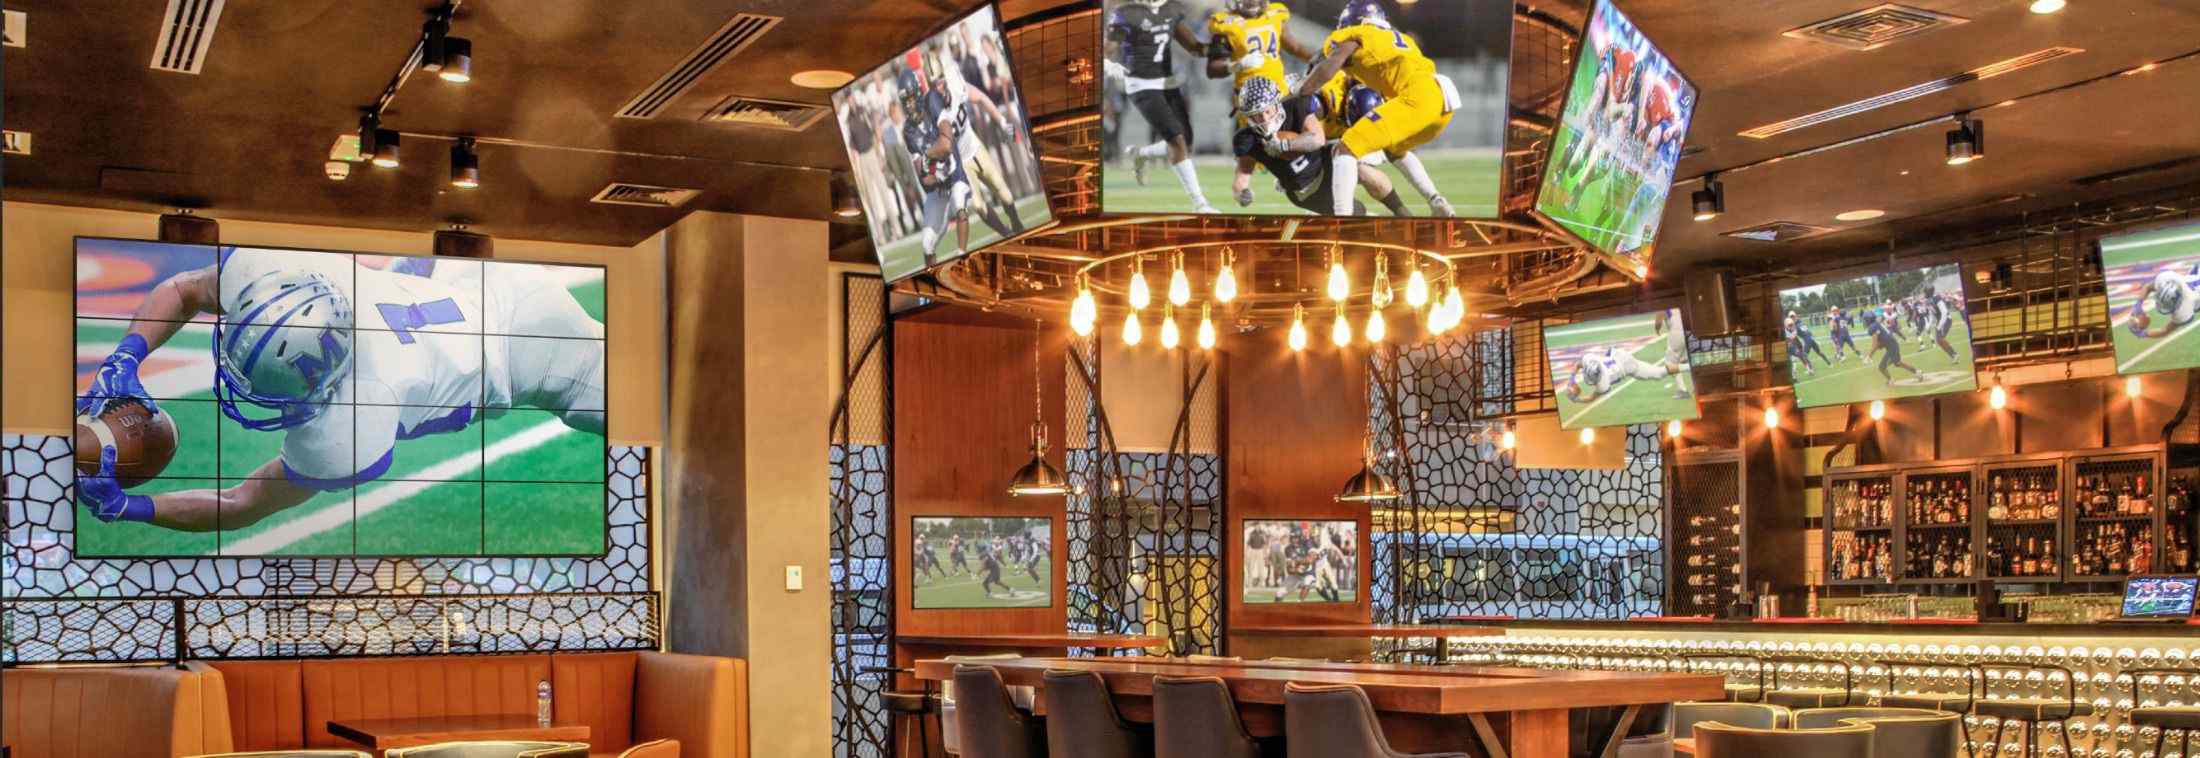 Use friendly commercial av systems that fits in bar & restaurant perfectly.